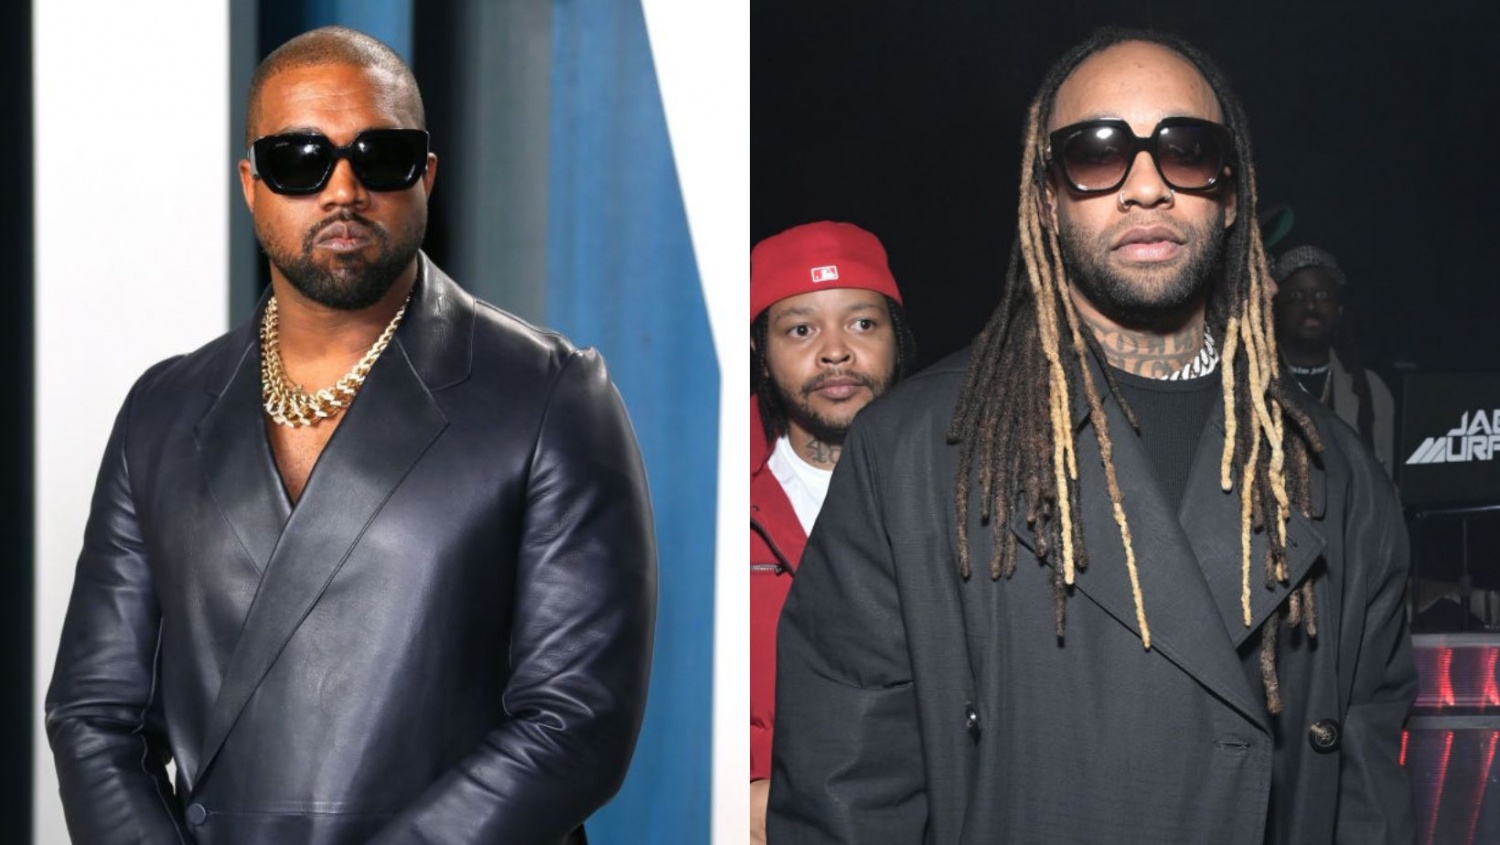 Ty Dolla $ign Doesn’t care about Kanye West’s broken reputation, issues, controversies